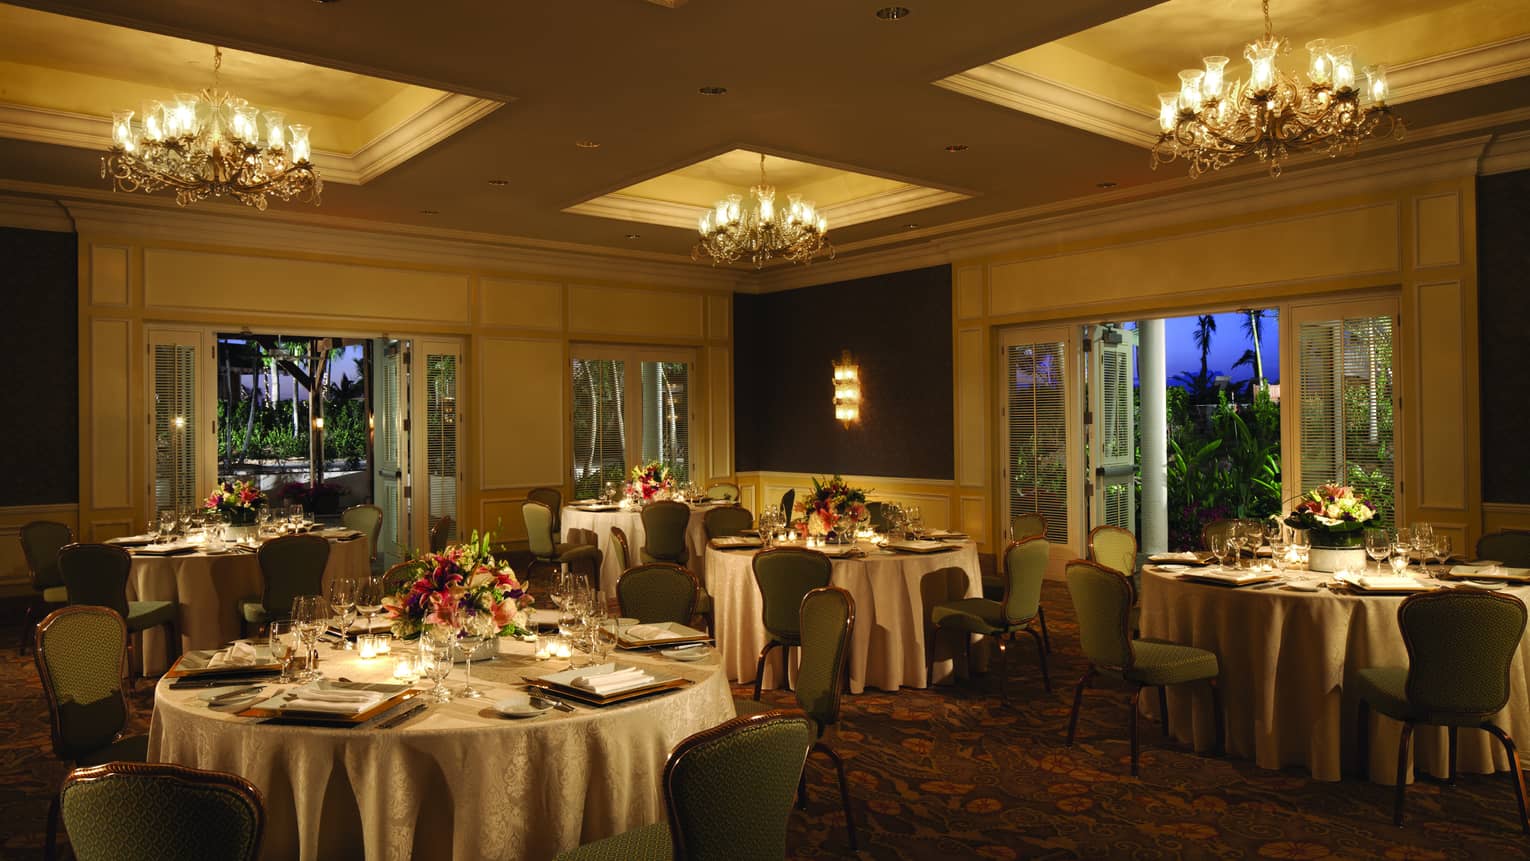 Round candle-lit banquet dining tables in dimly-lit ballroom